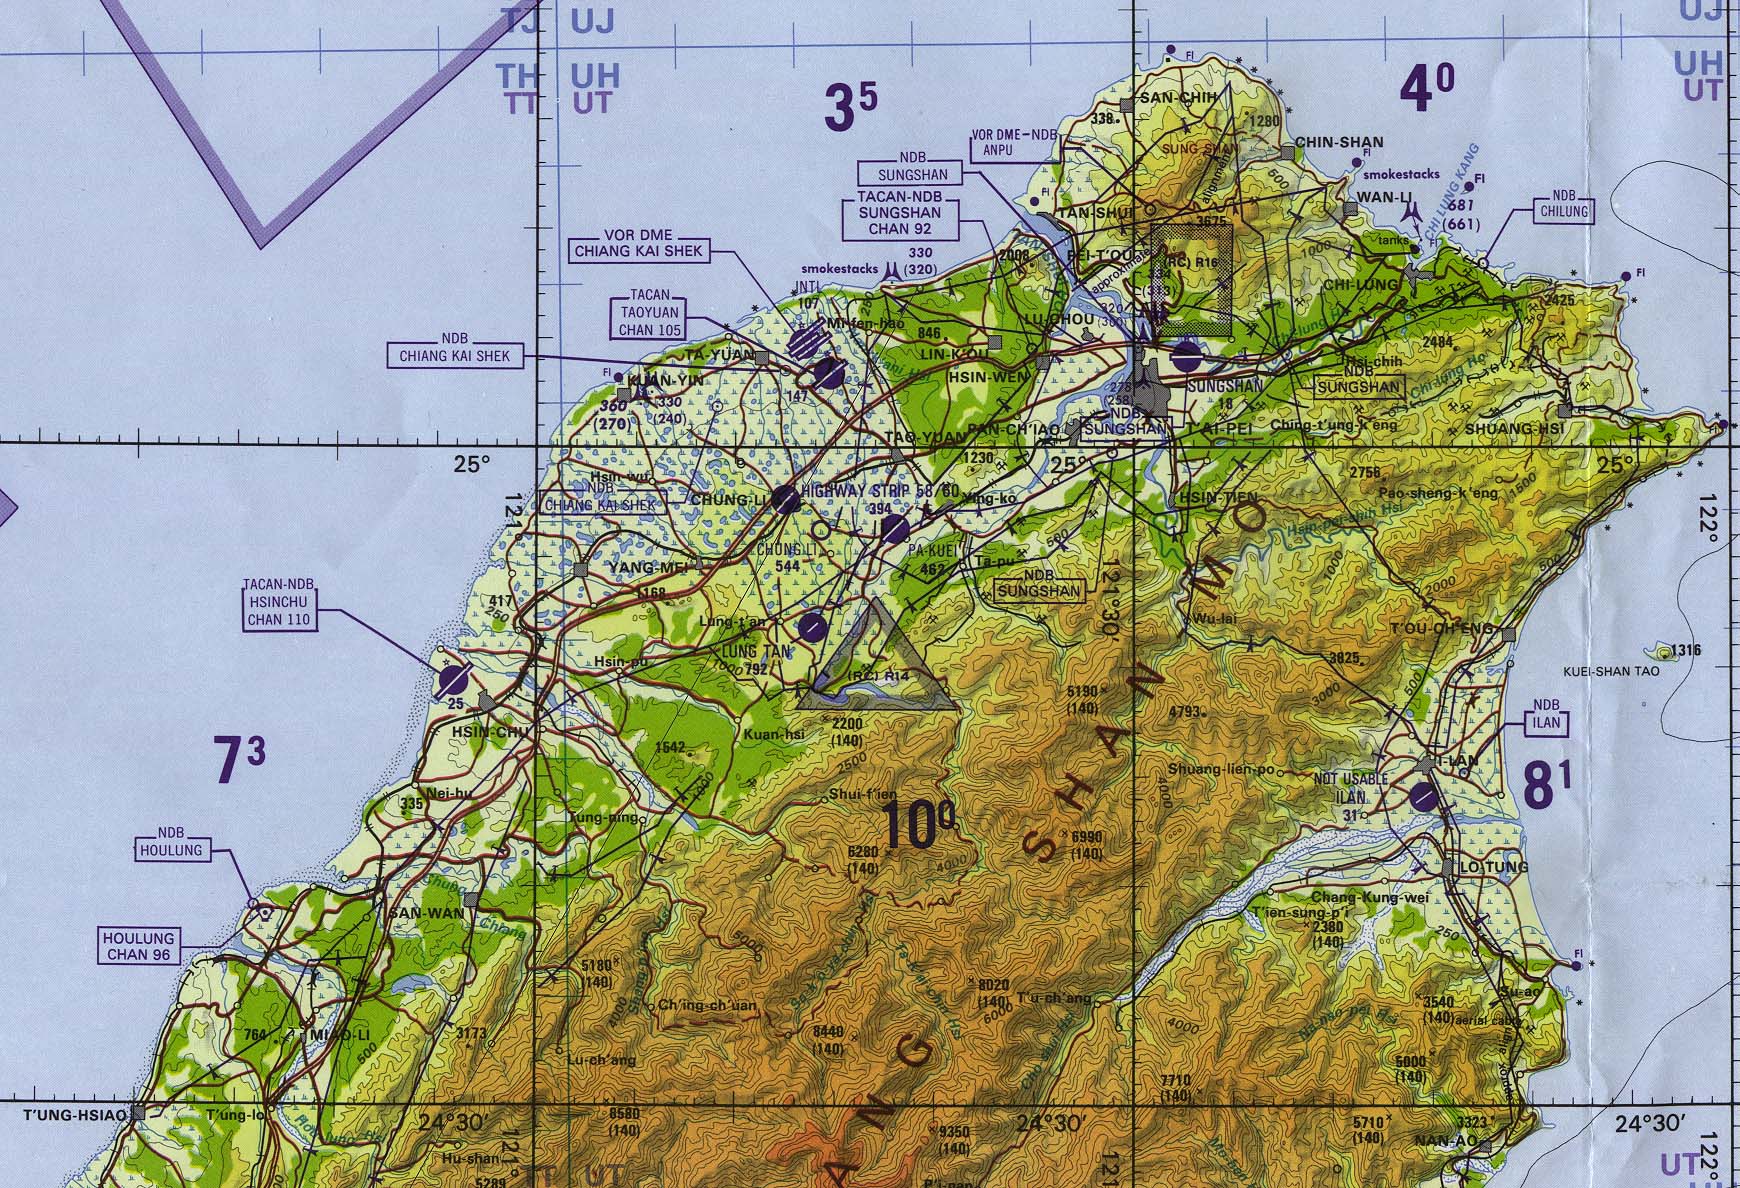 Map Of Taiwan, Northern Taiwan (Tactical Pilotage Chart) original scale 1:500,000 Portion of TPC H-12C, Defense Mapping Agency 1996 (486K) Not for navigational use 